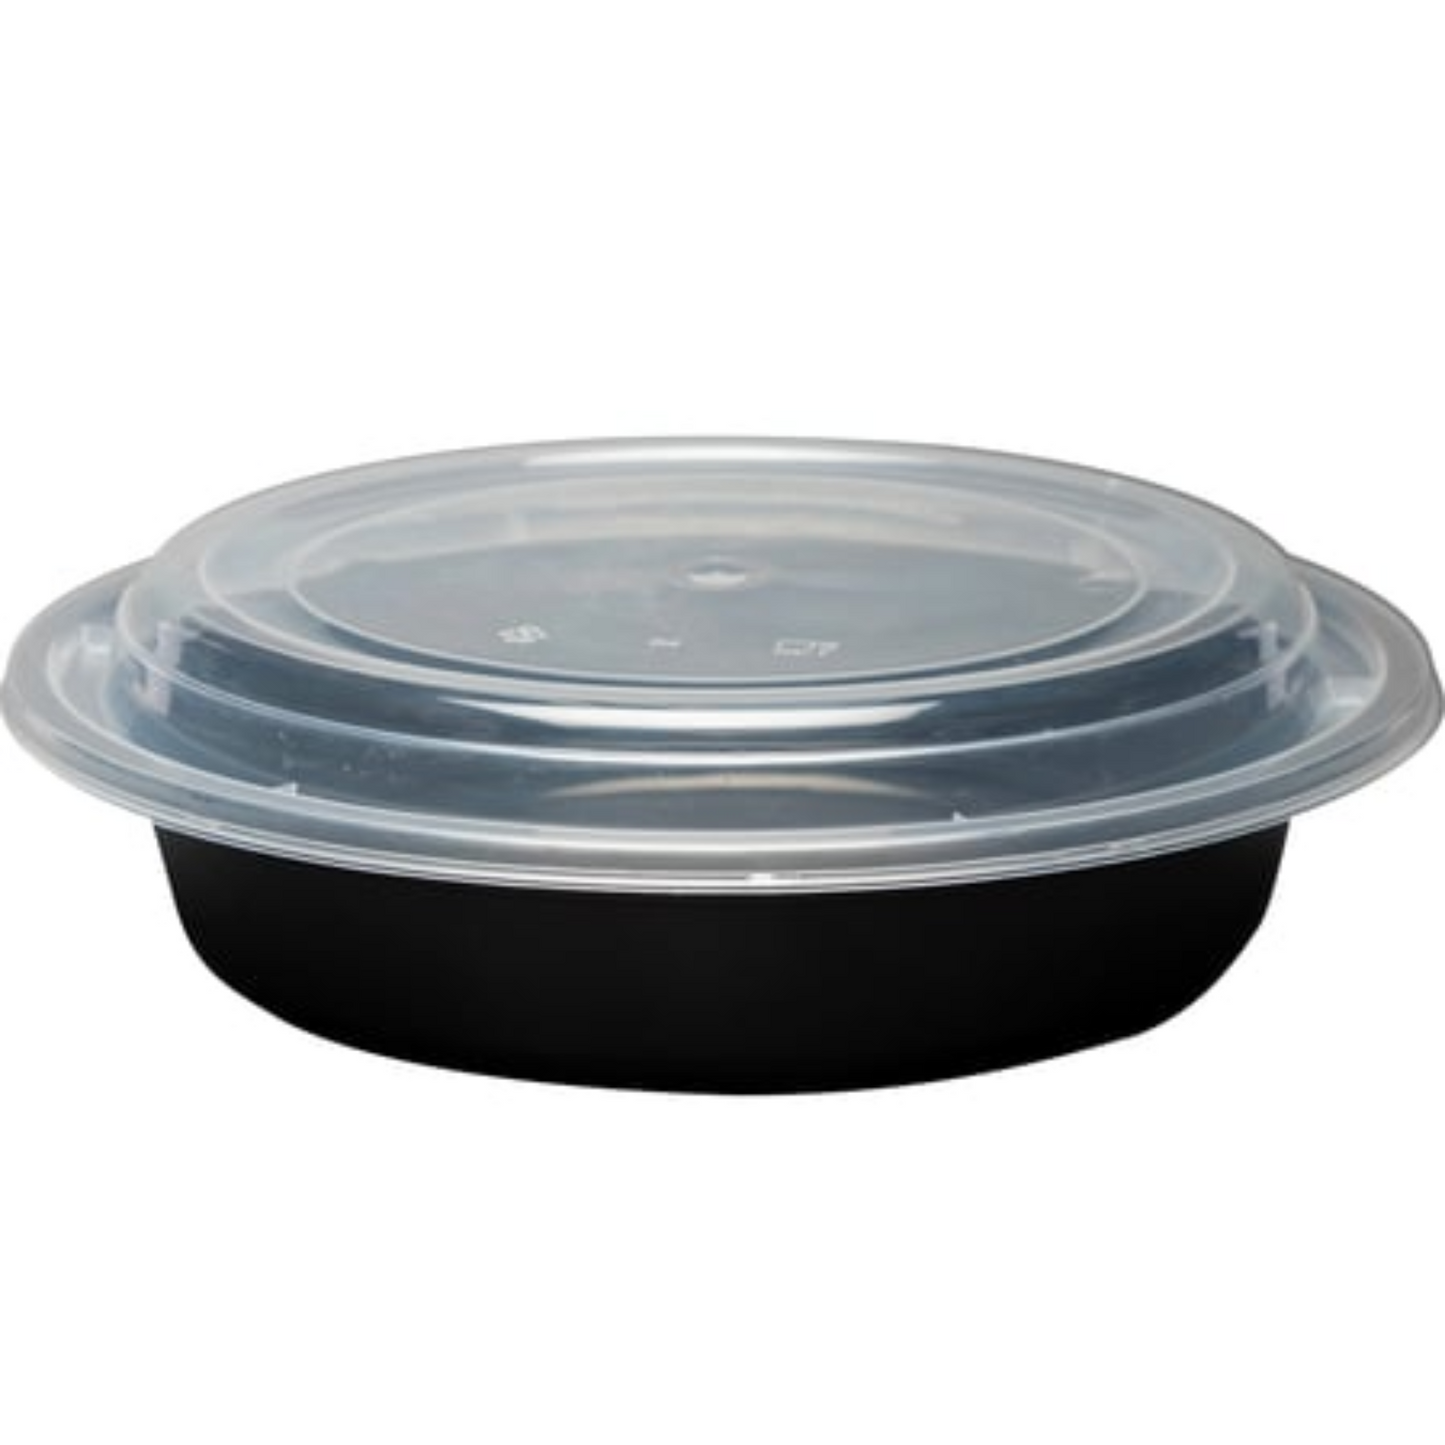 32oz. Disposable Round Meal Prep/ Bento Box Containers with Clear Lids Food Storage & Serving VeZee   